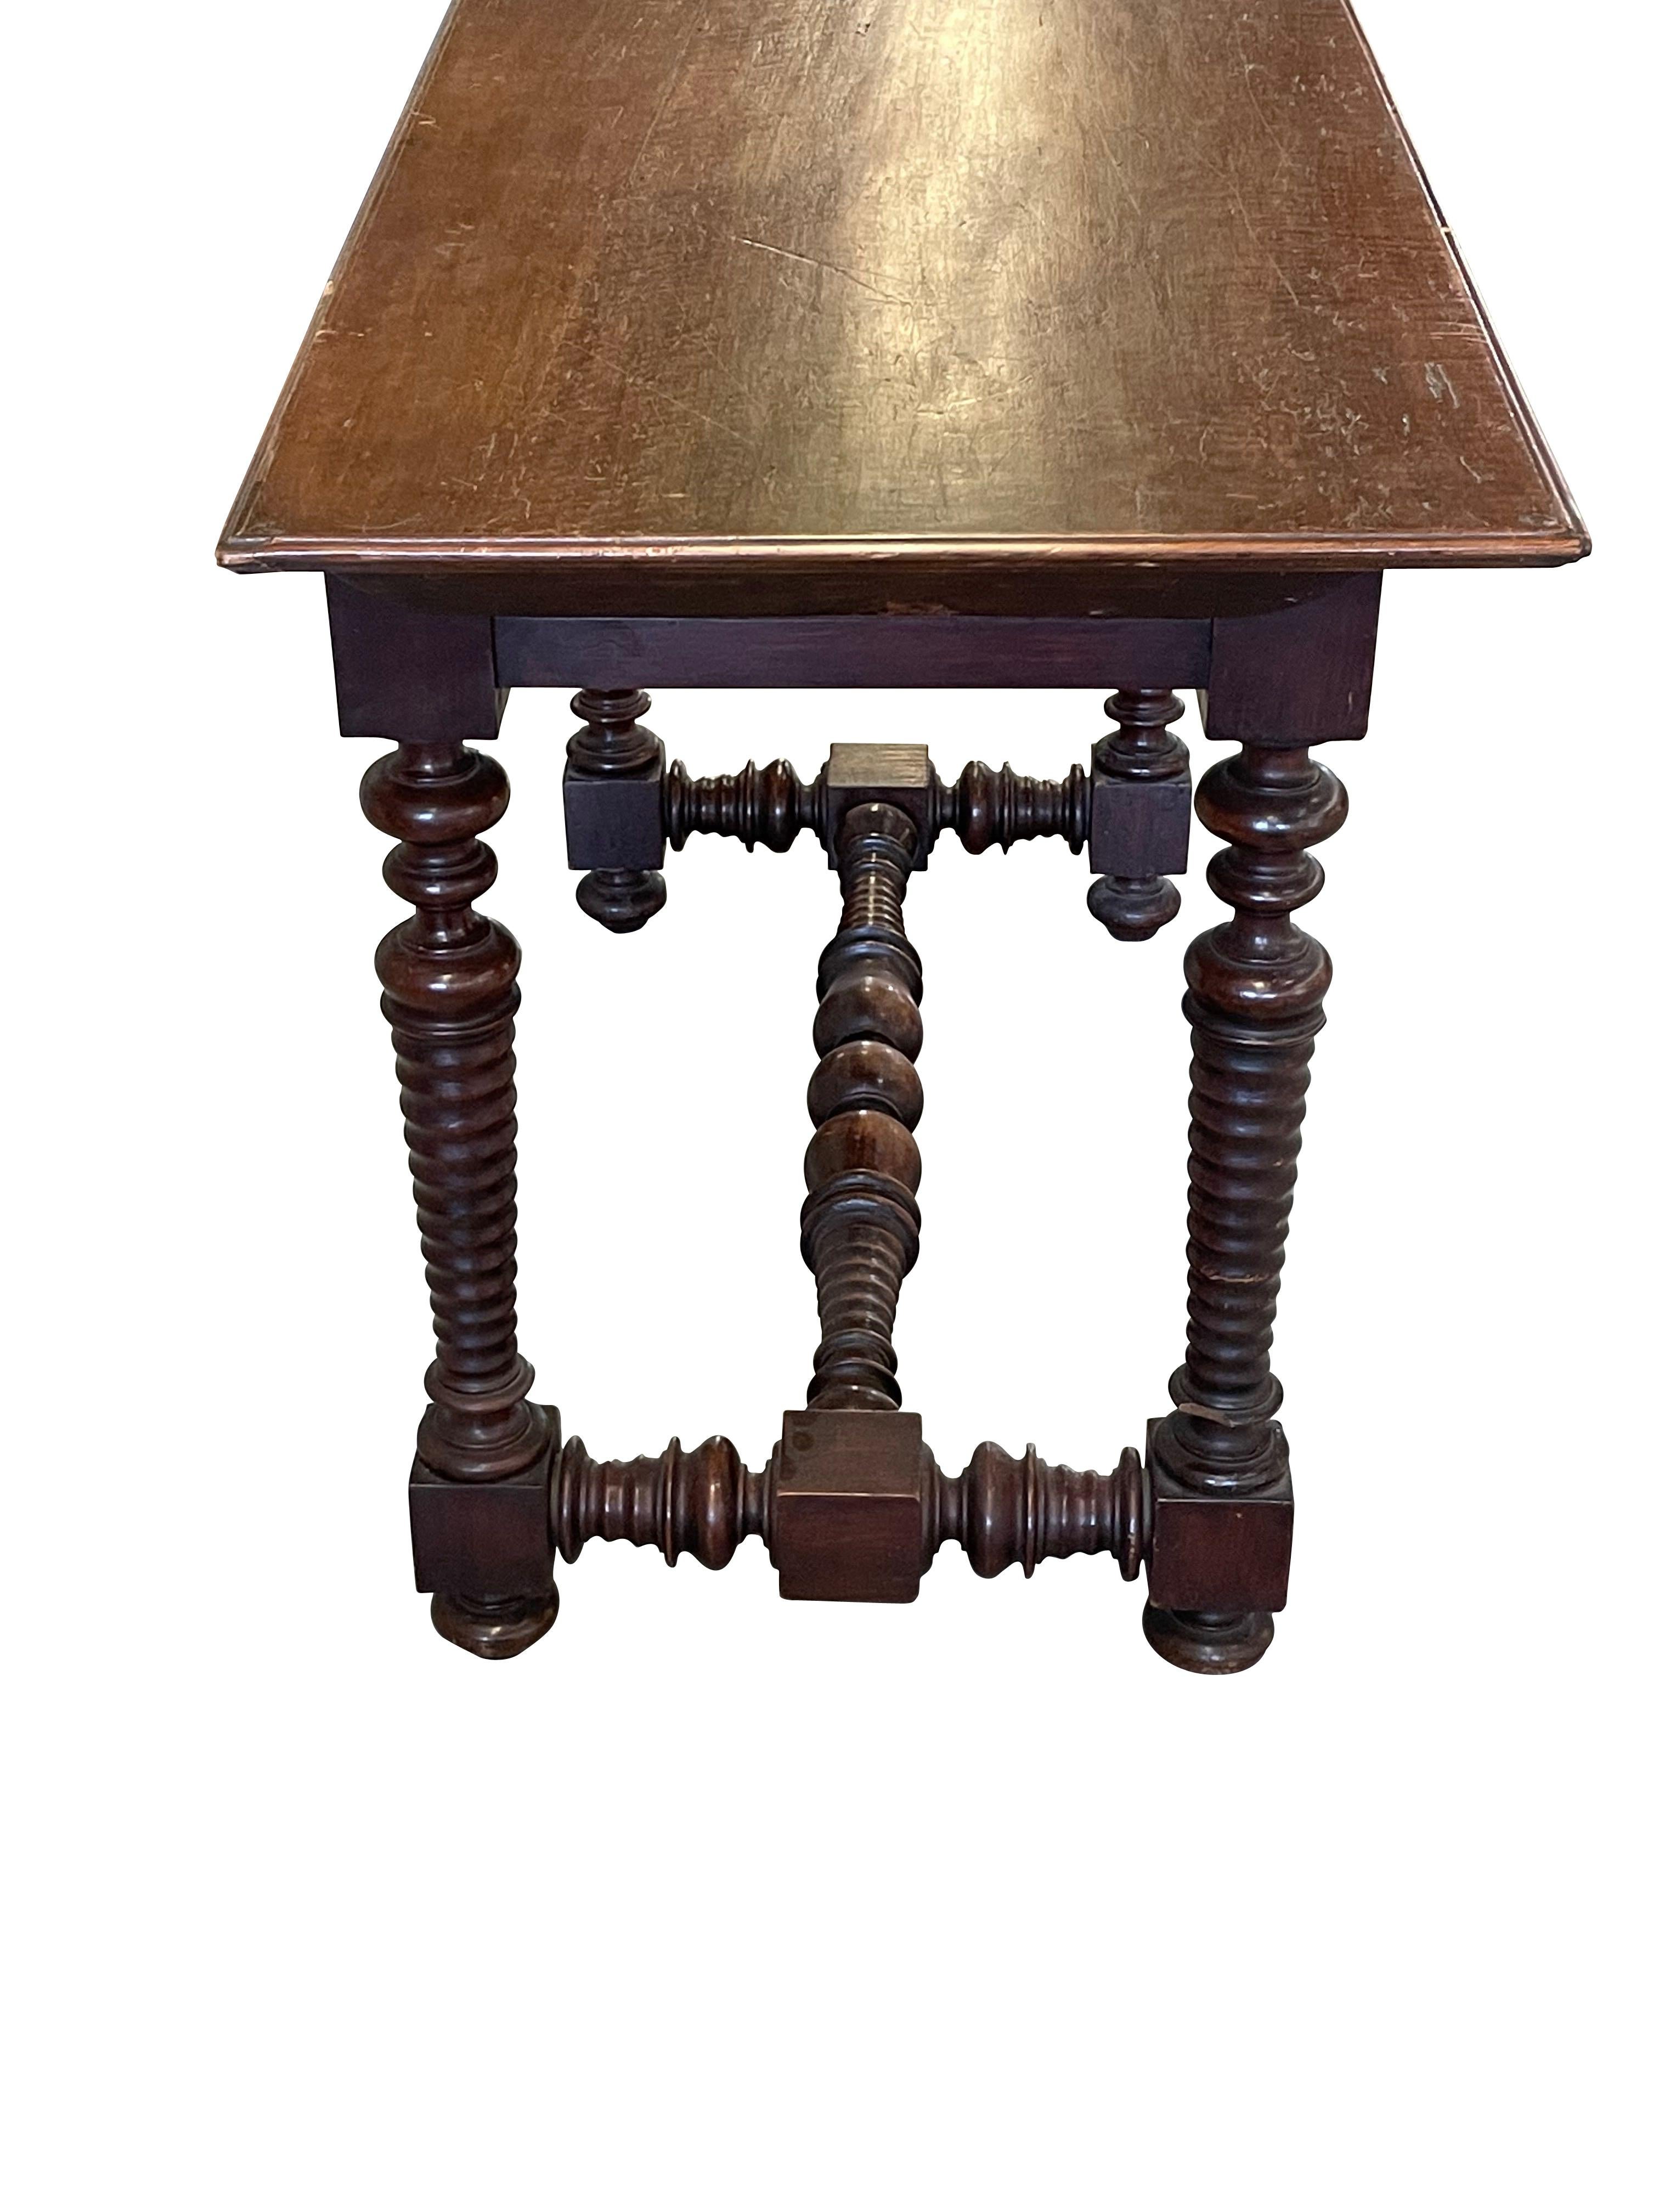 18th century Italian turned leg side table with two drawers.
Can also be used as a side table.
Arriving April.